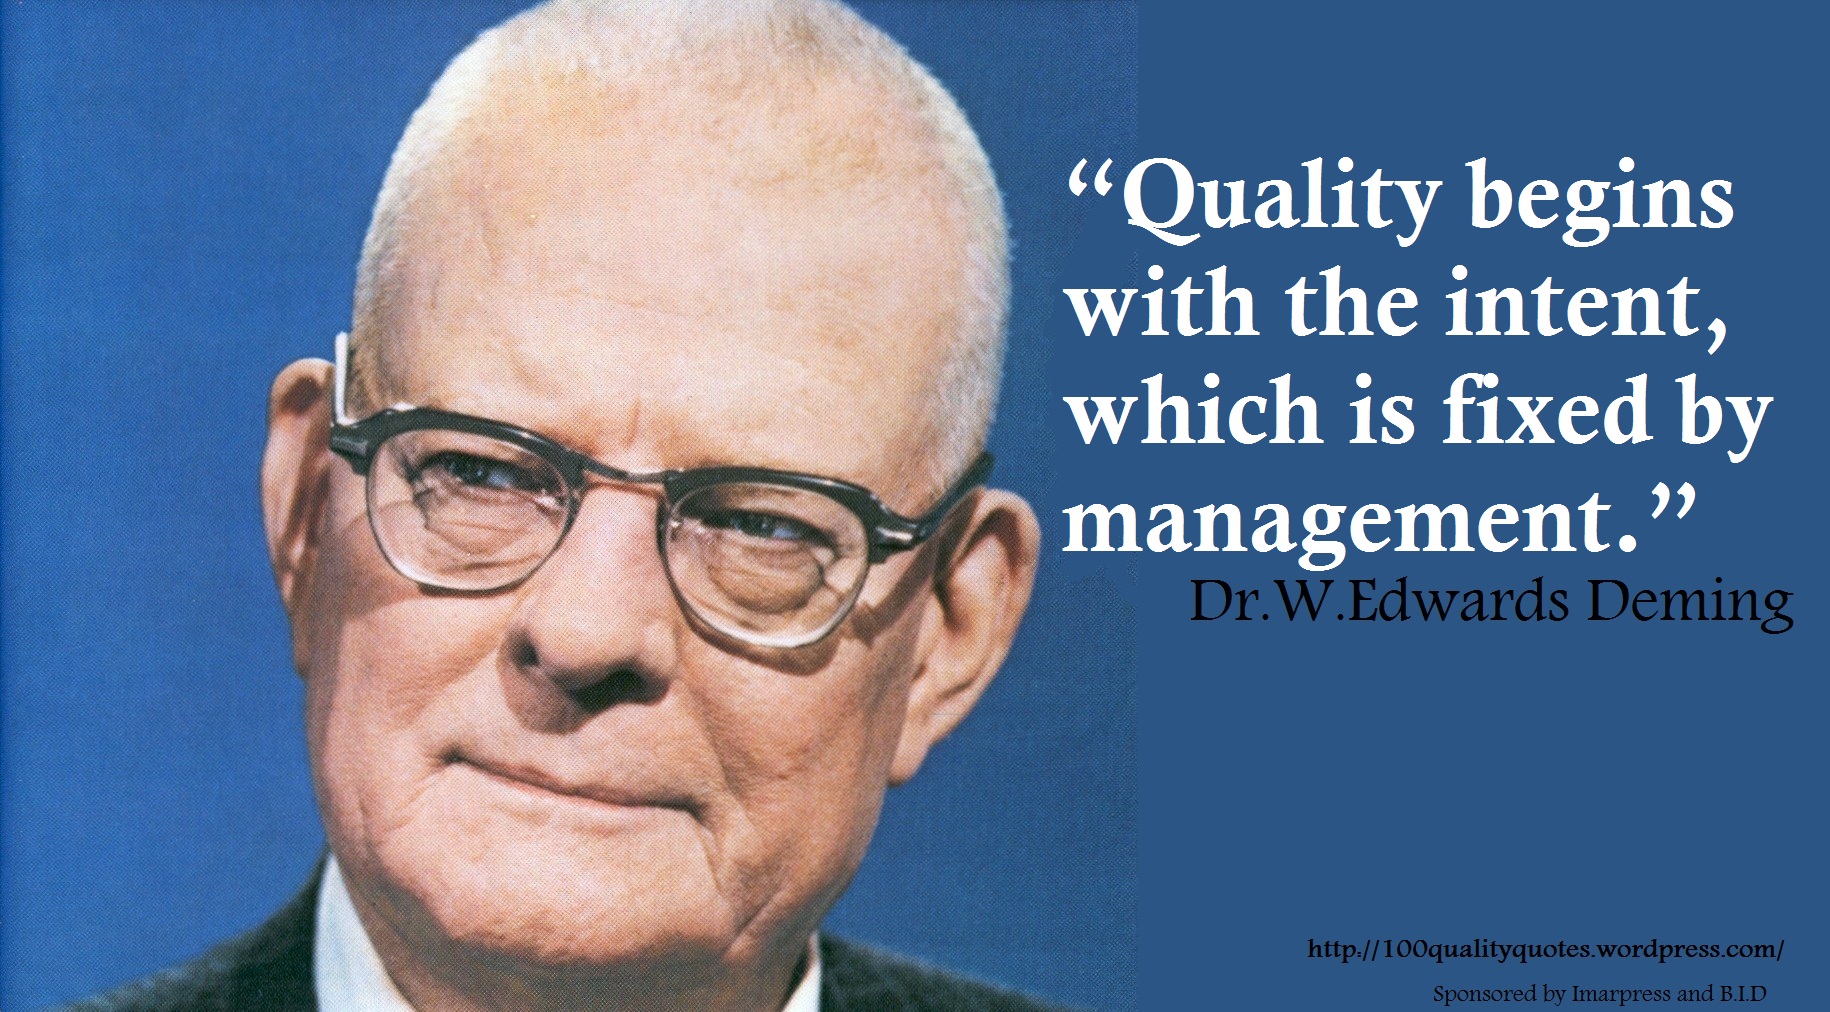 dr w edwards deming1